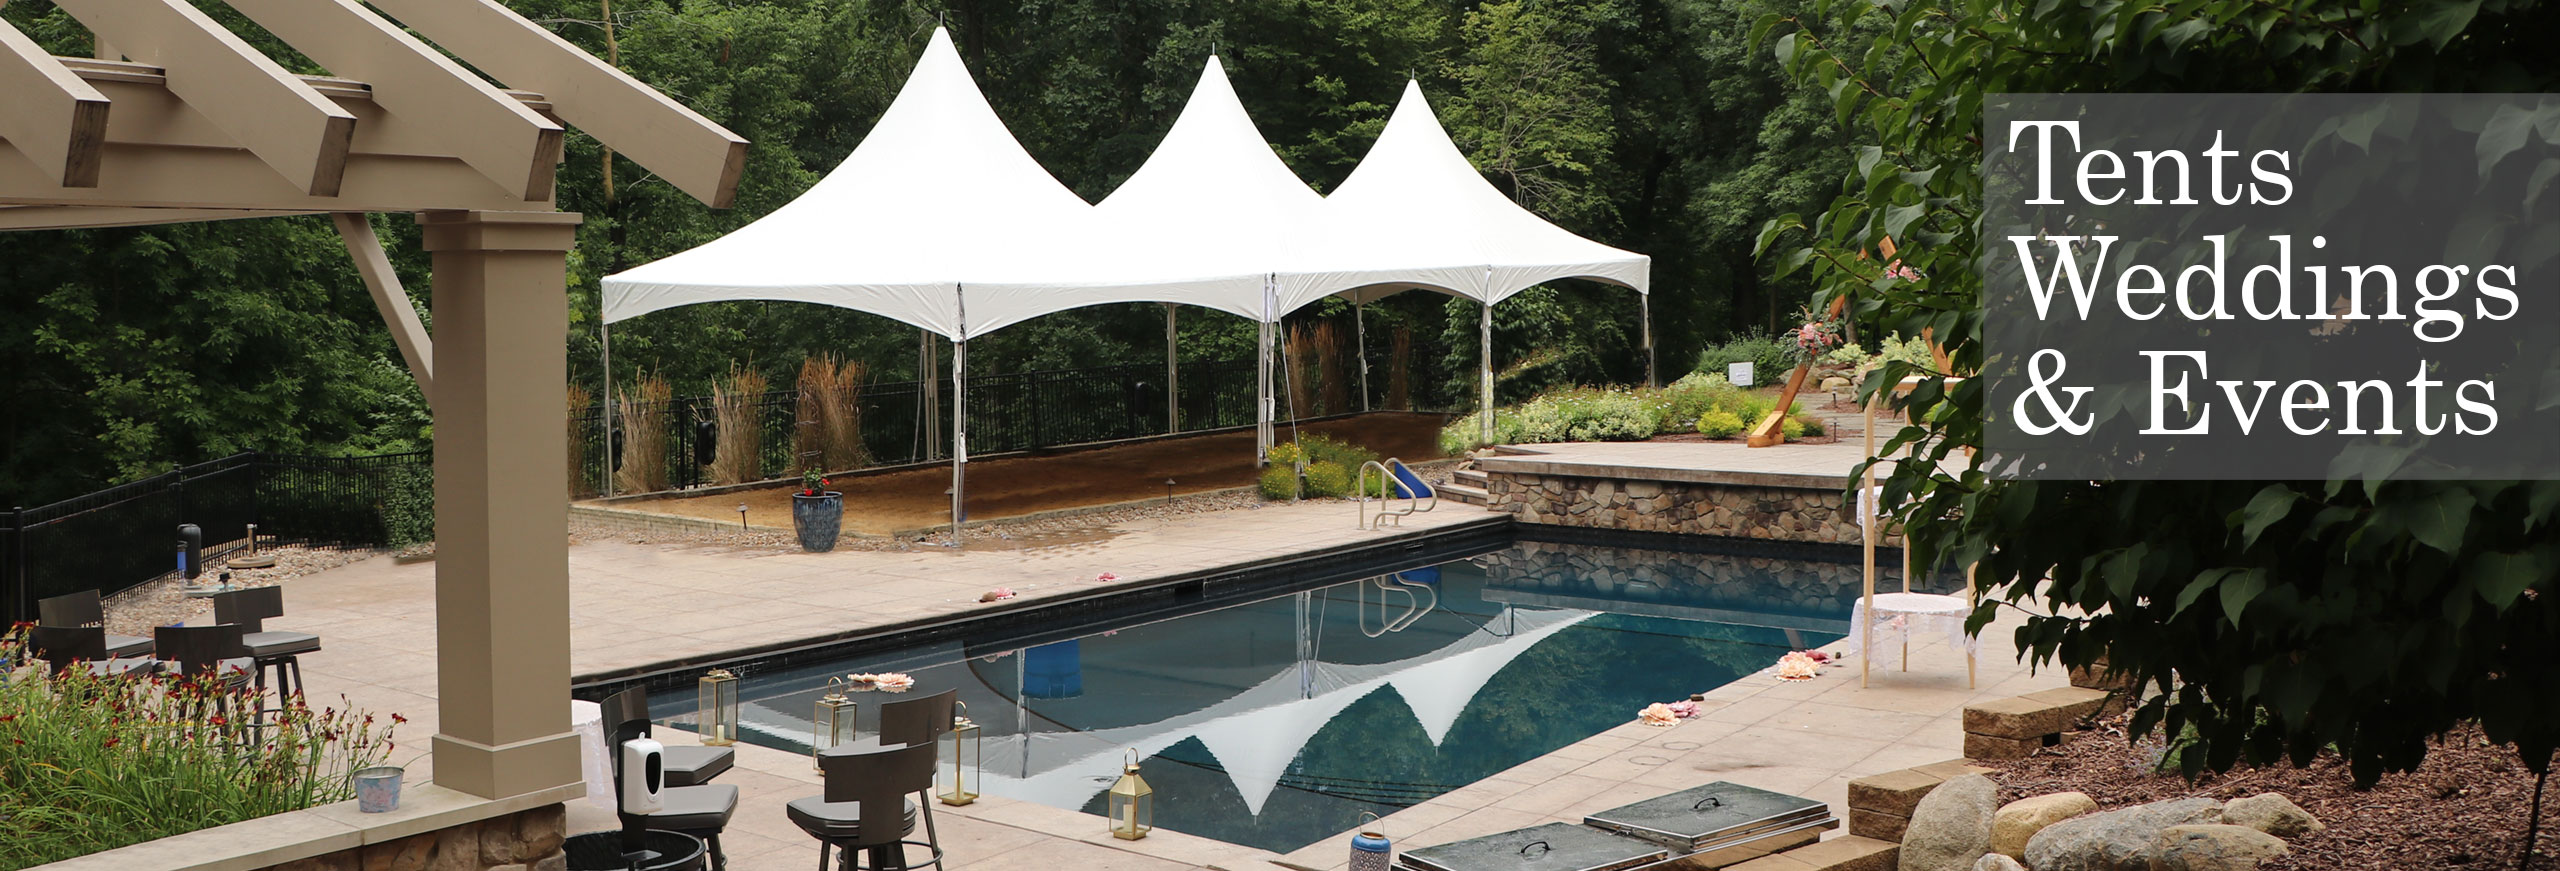 tents_pool_party